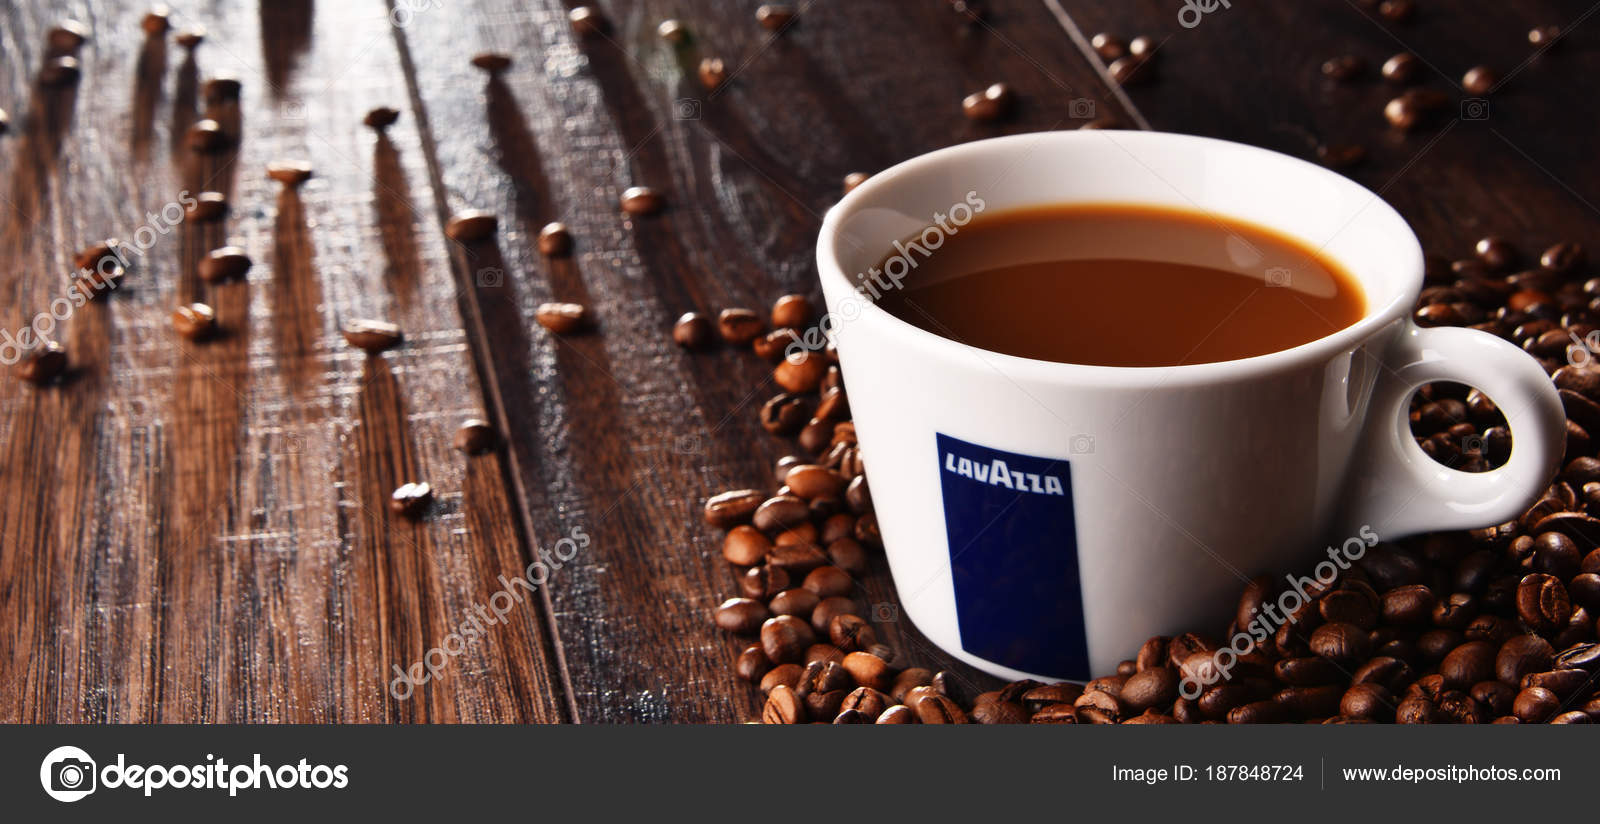 Composition with cup of Lavazza coffee and beans – Stock Editorial Photo ©  monticello #187848724